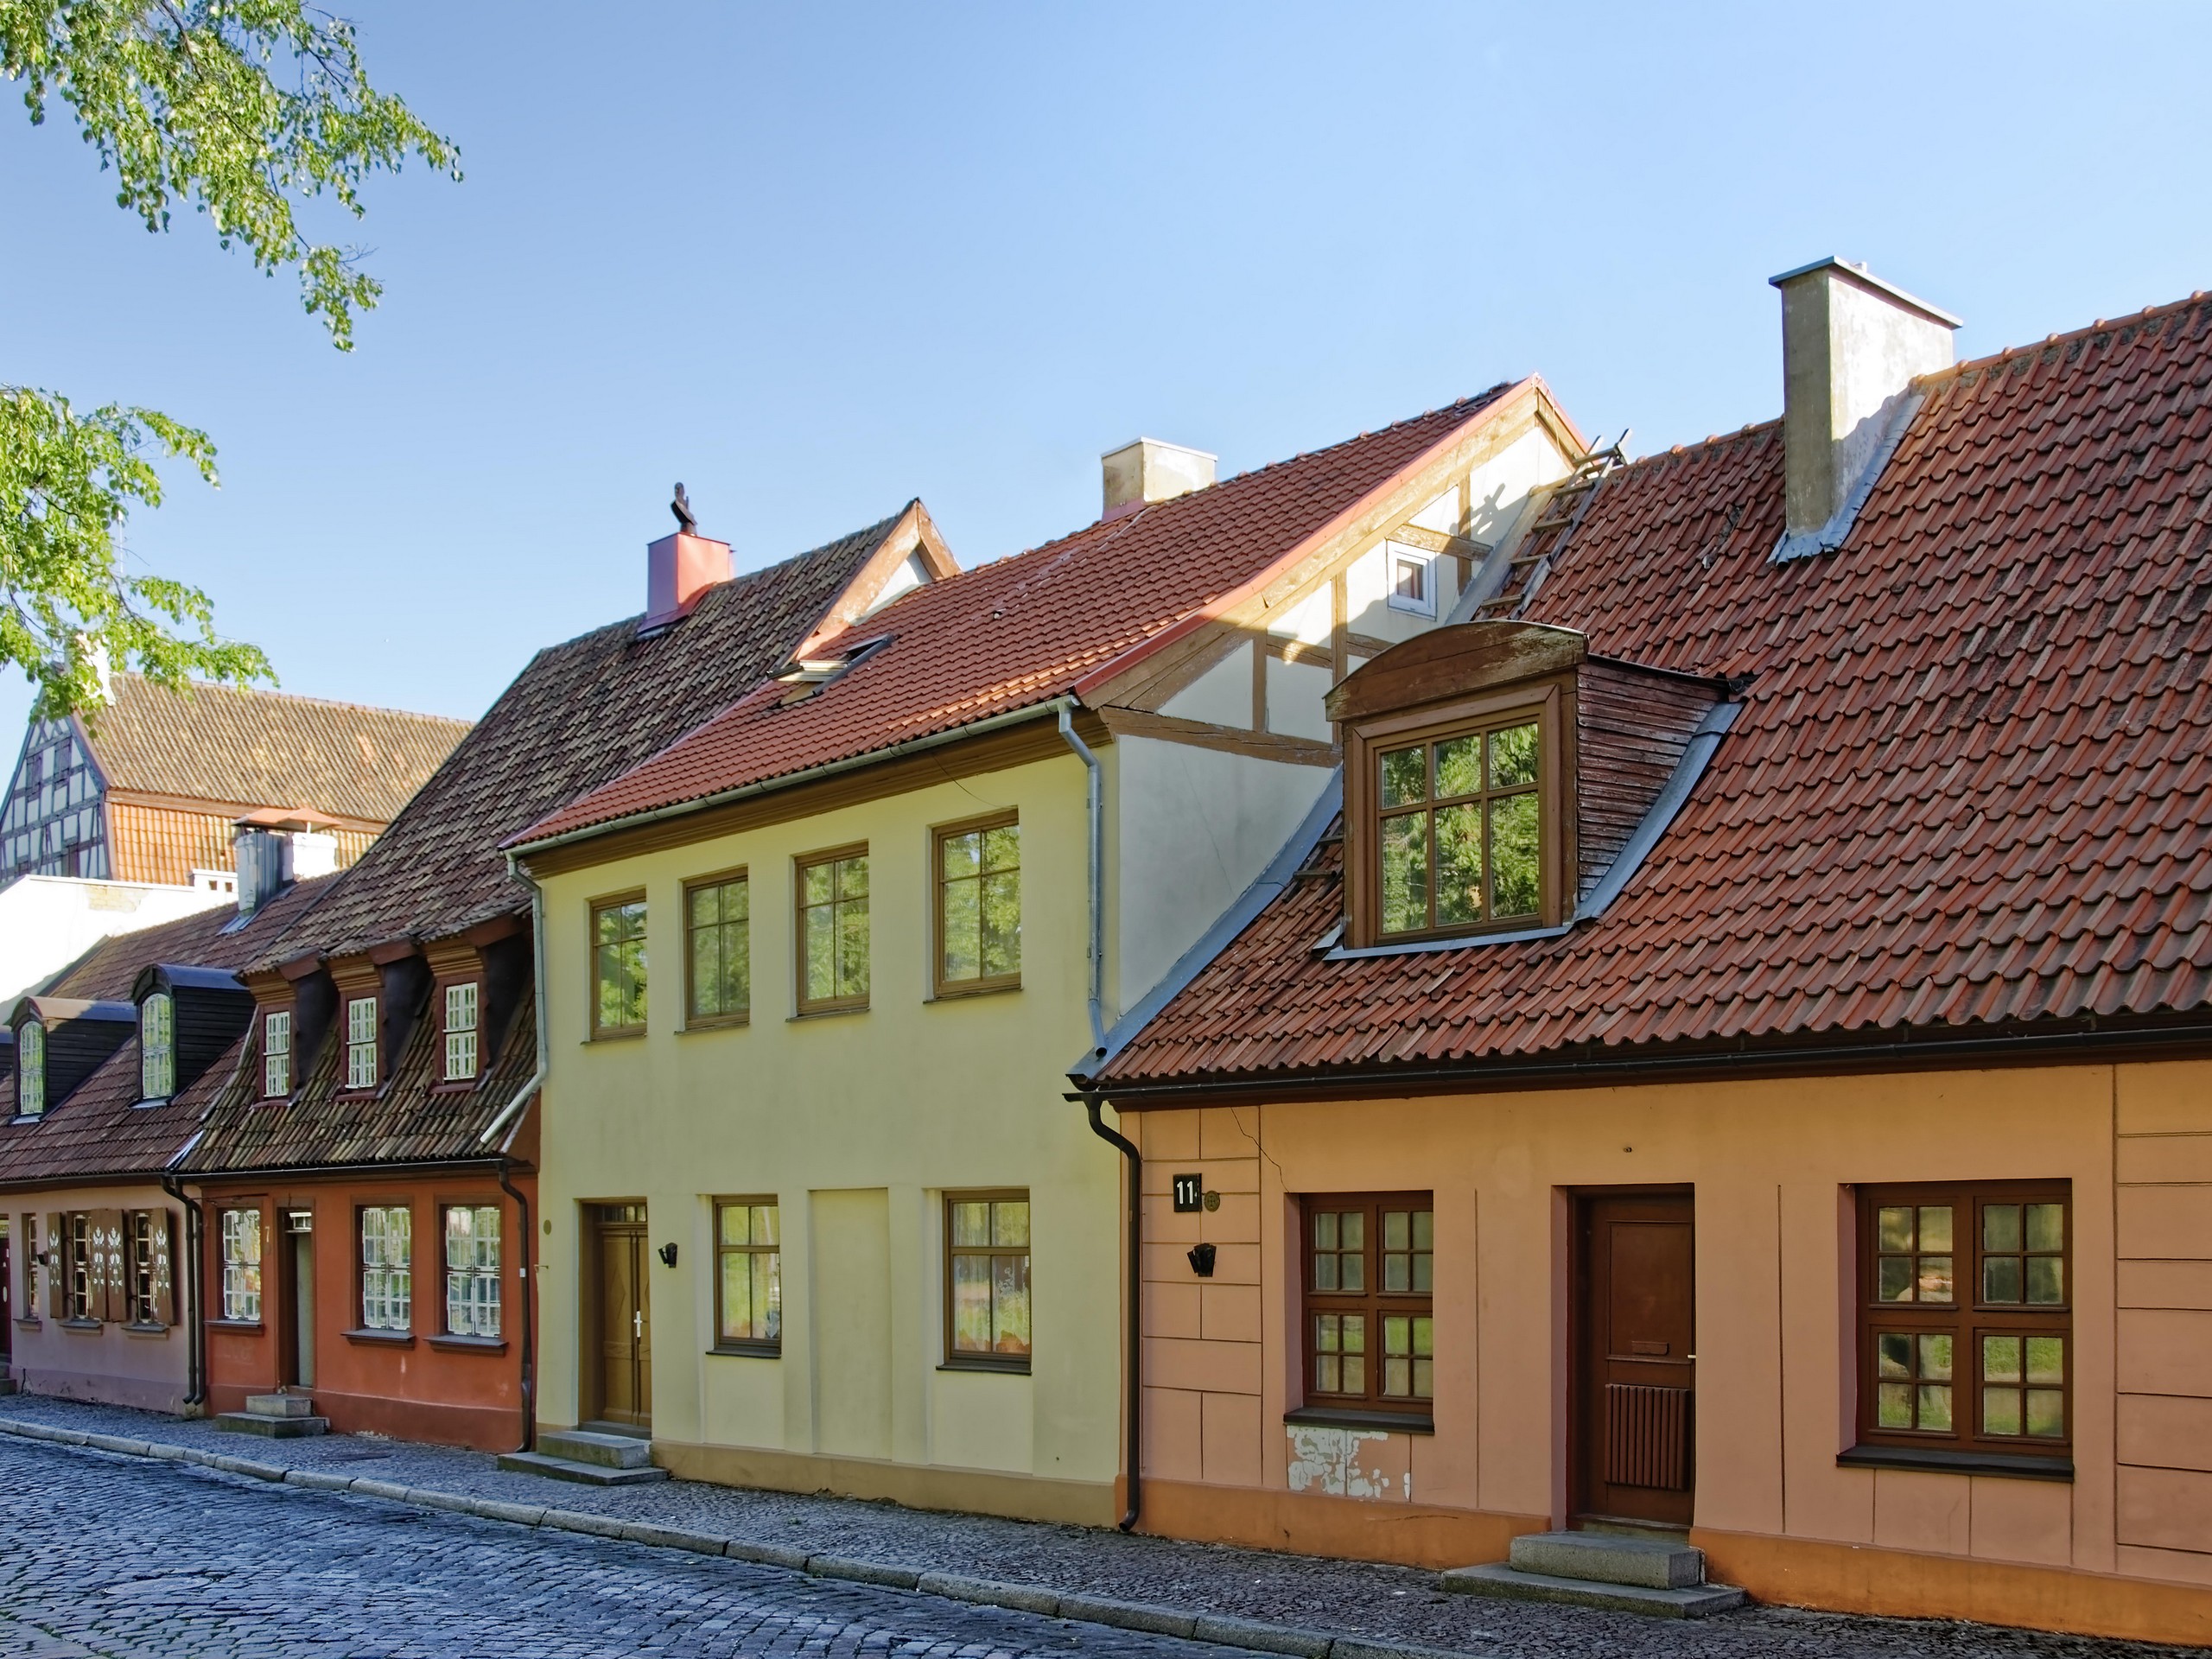 Small cozy street in Klaipeda, Lithuania